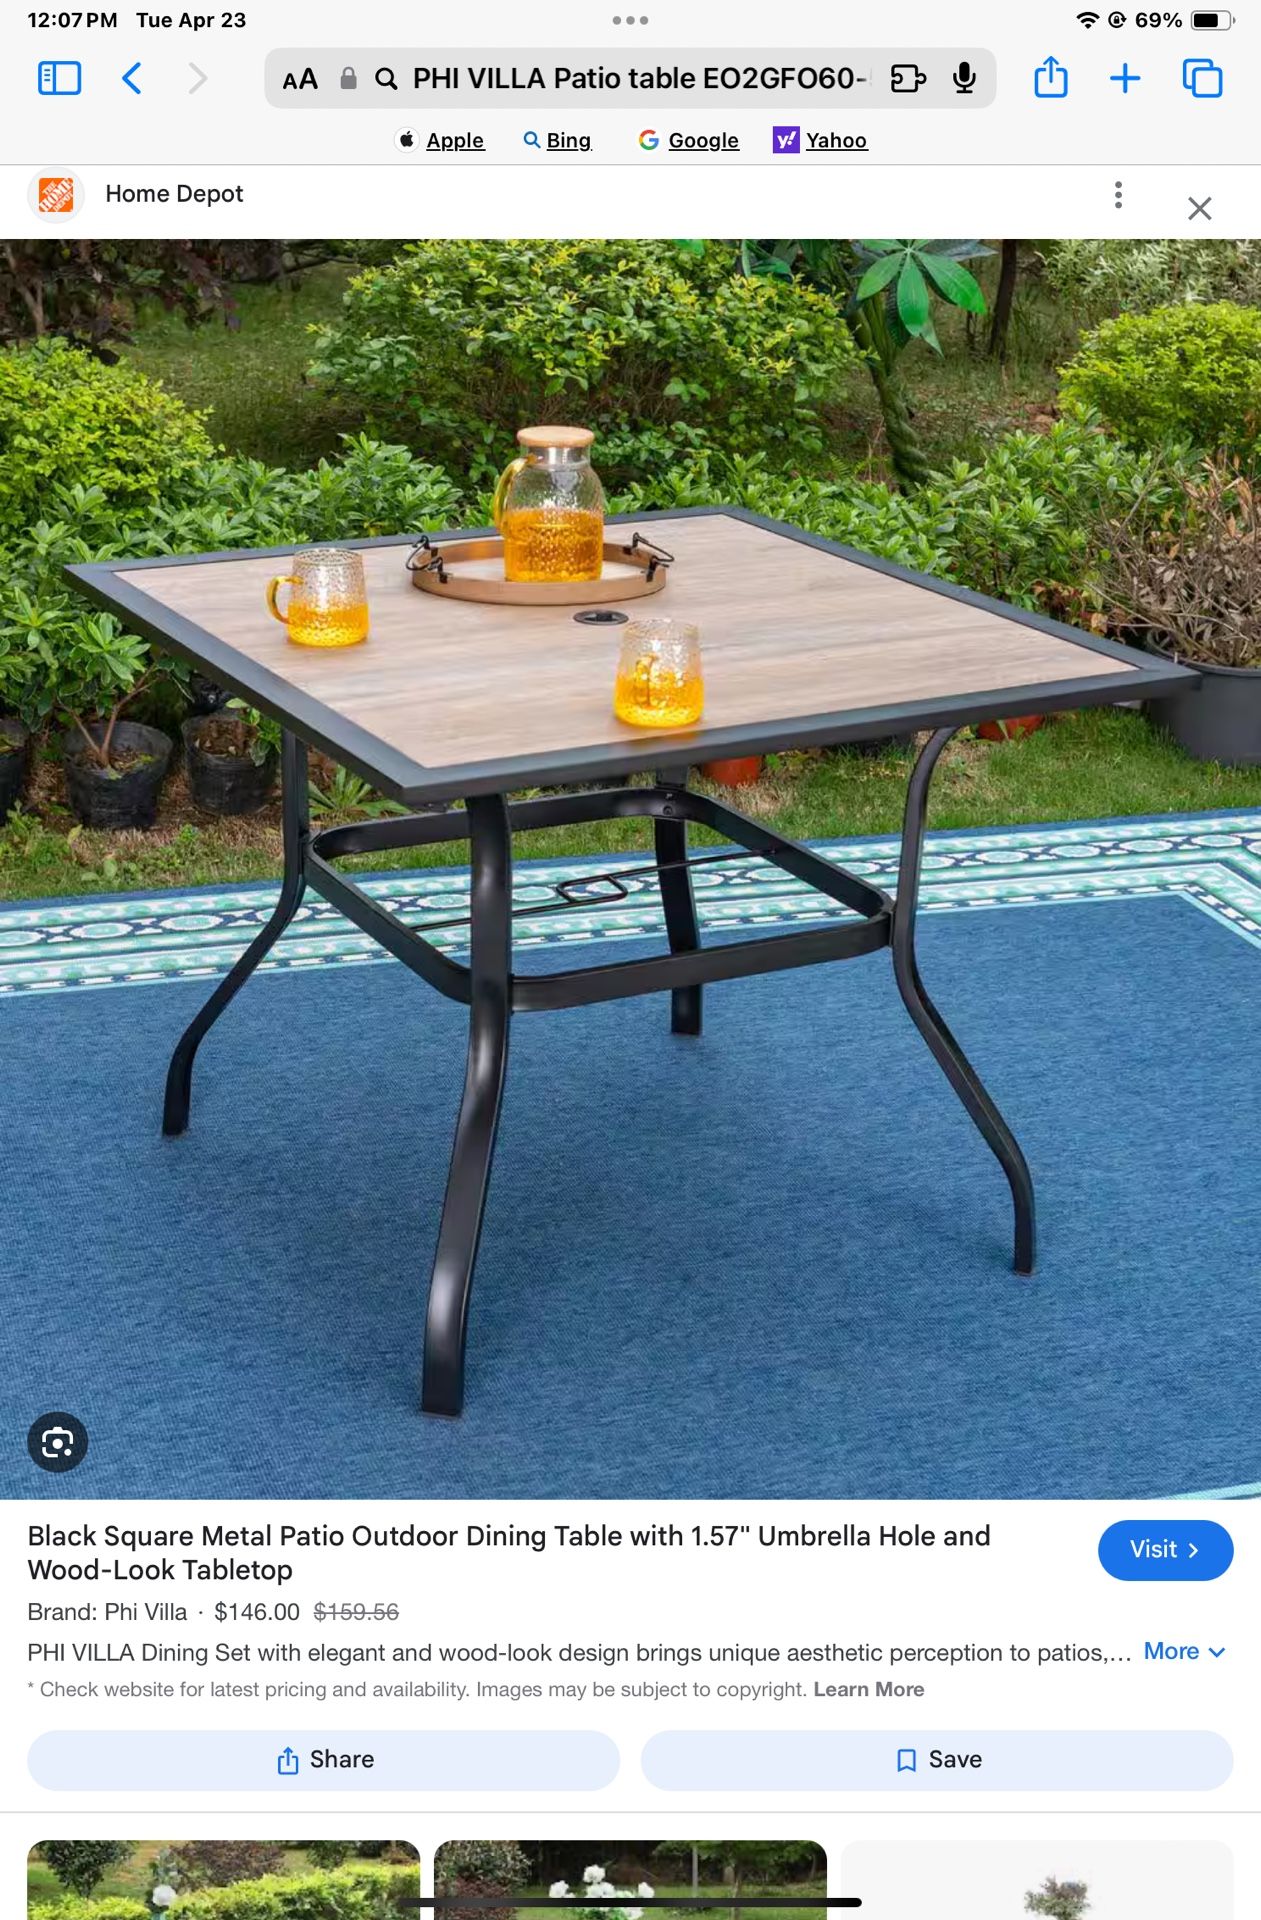 New Square Metal Table